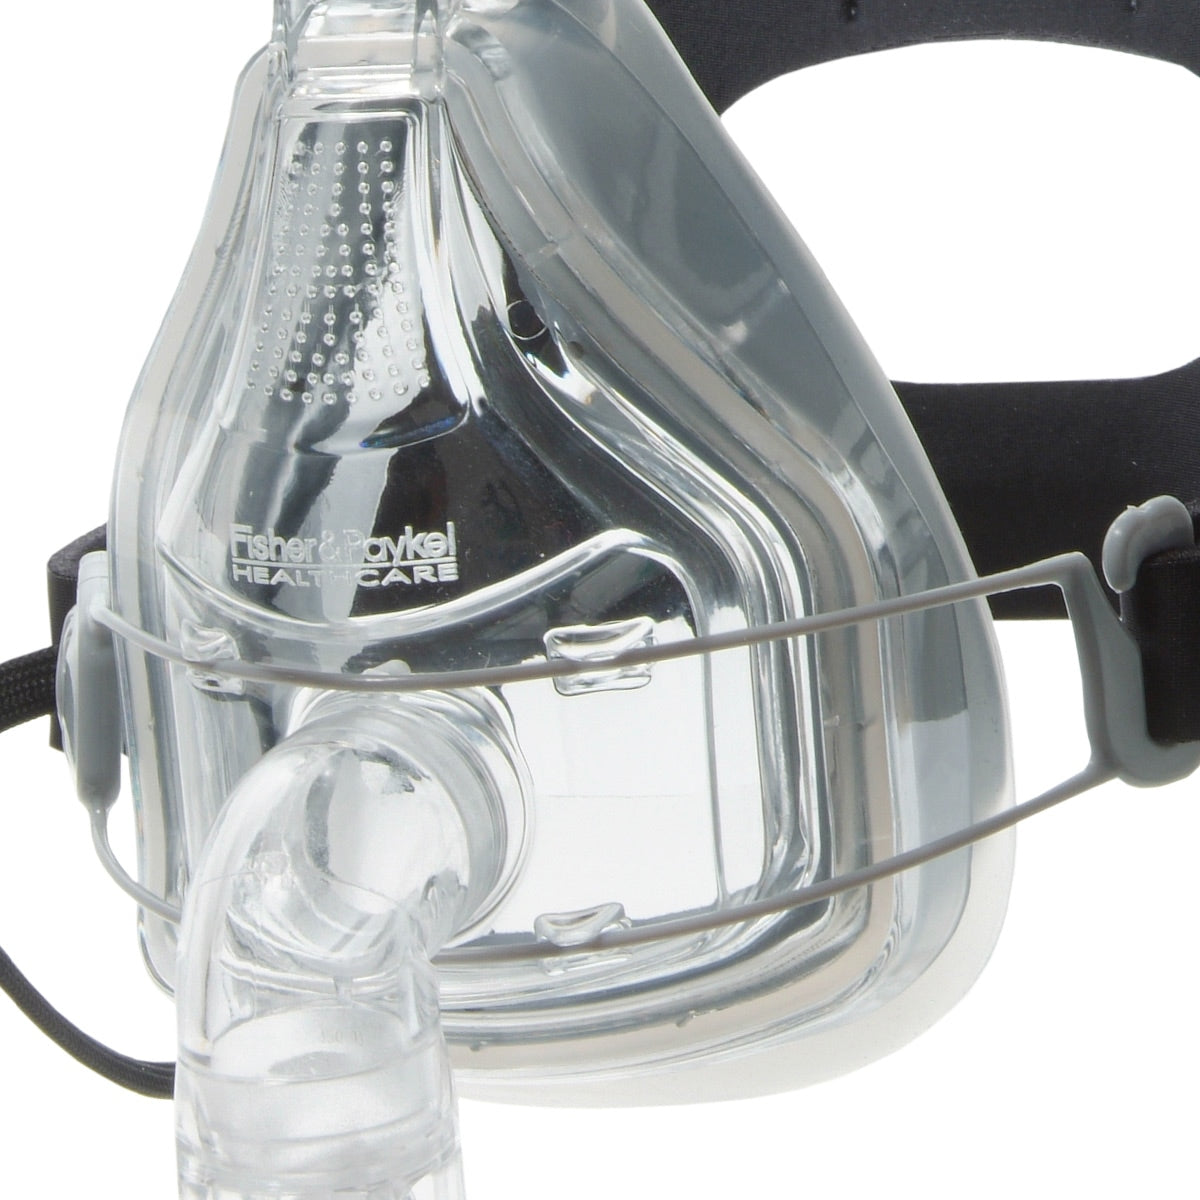 Fisher & Paykel - FlexiFit 432 - 400HC519 - CPAP Mask Component CPAP Mask  FlexiFit 432 Full Face Style Small Cushion